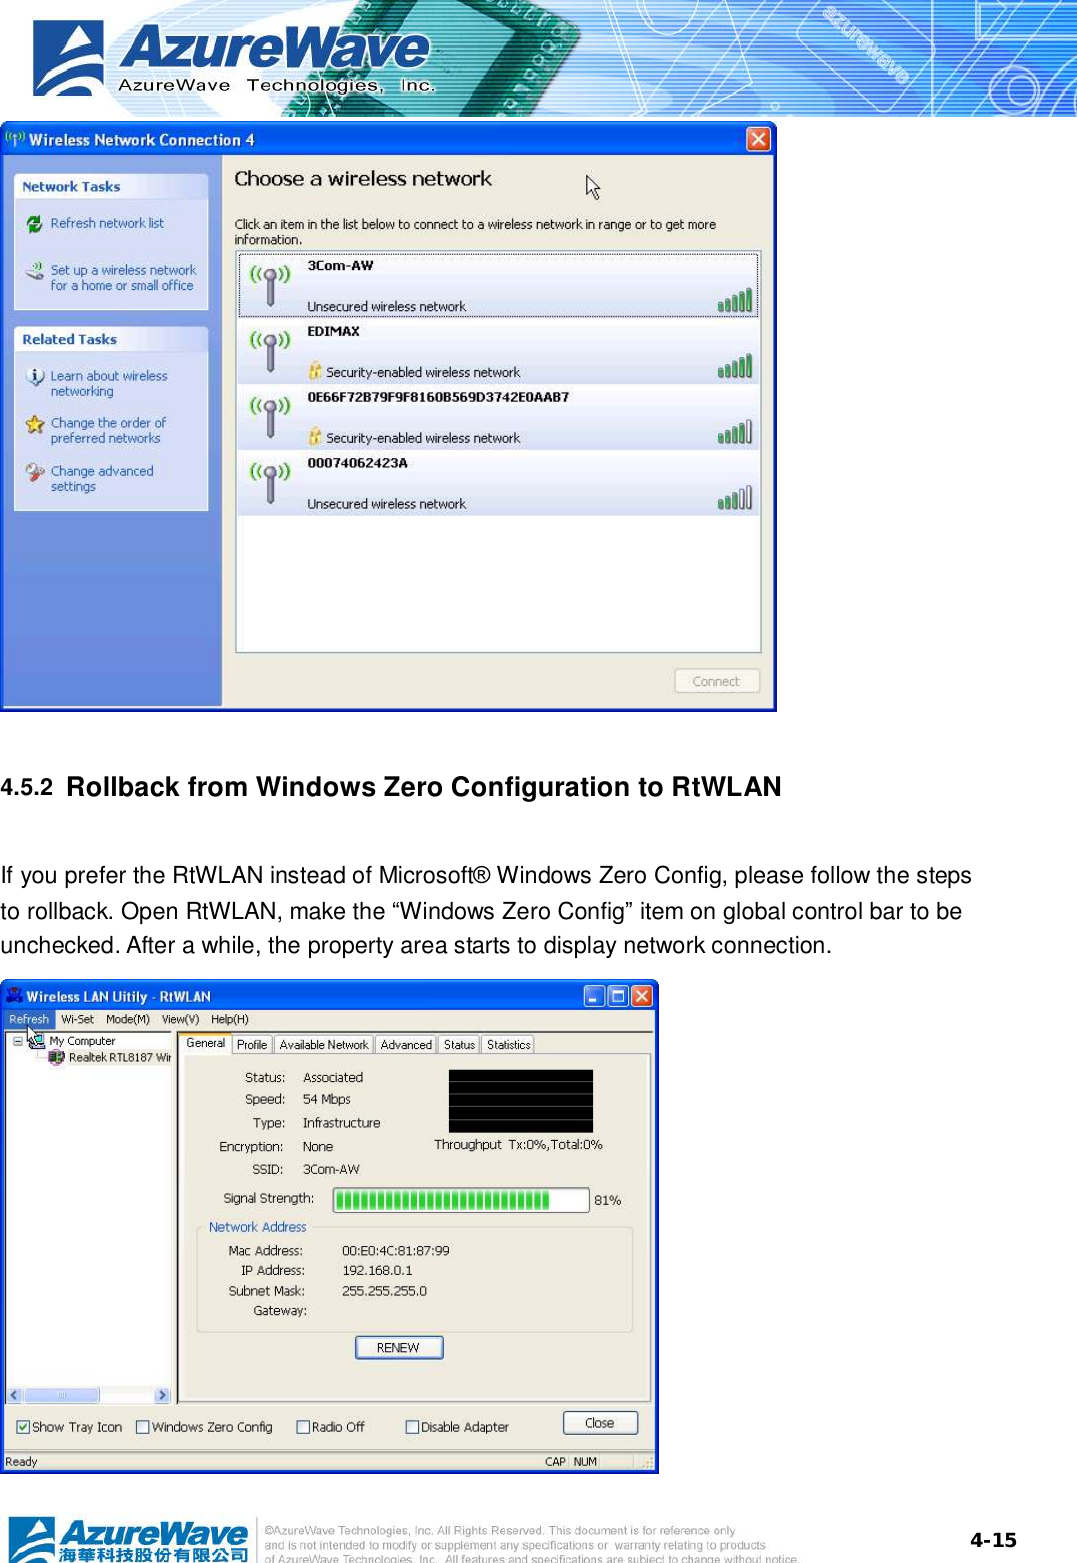  4-15 4.5.2  Rollback from Windows Zero Configuration to RtWLAN If you prefer the RtWLAN instead of Microsoft® Windows Zero Config, please follow the steps to rollback. Open RtWLAN, make the “Windows Zero Config” item on global control bar to be unchecked. After a while, the property area starts to display network connection.   